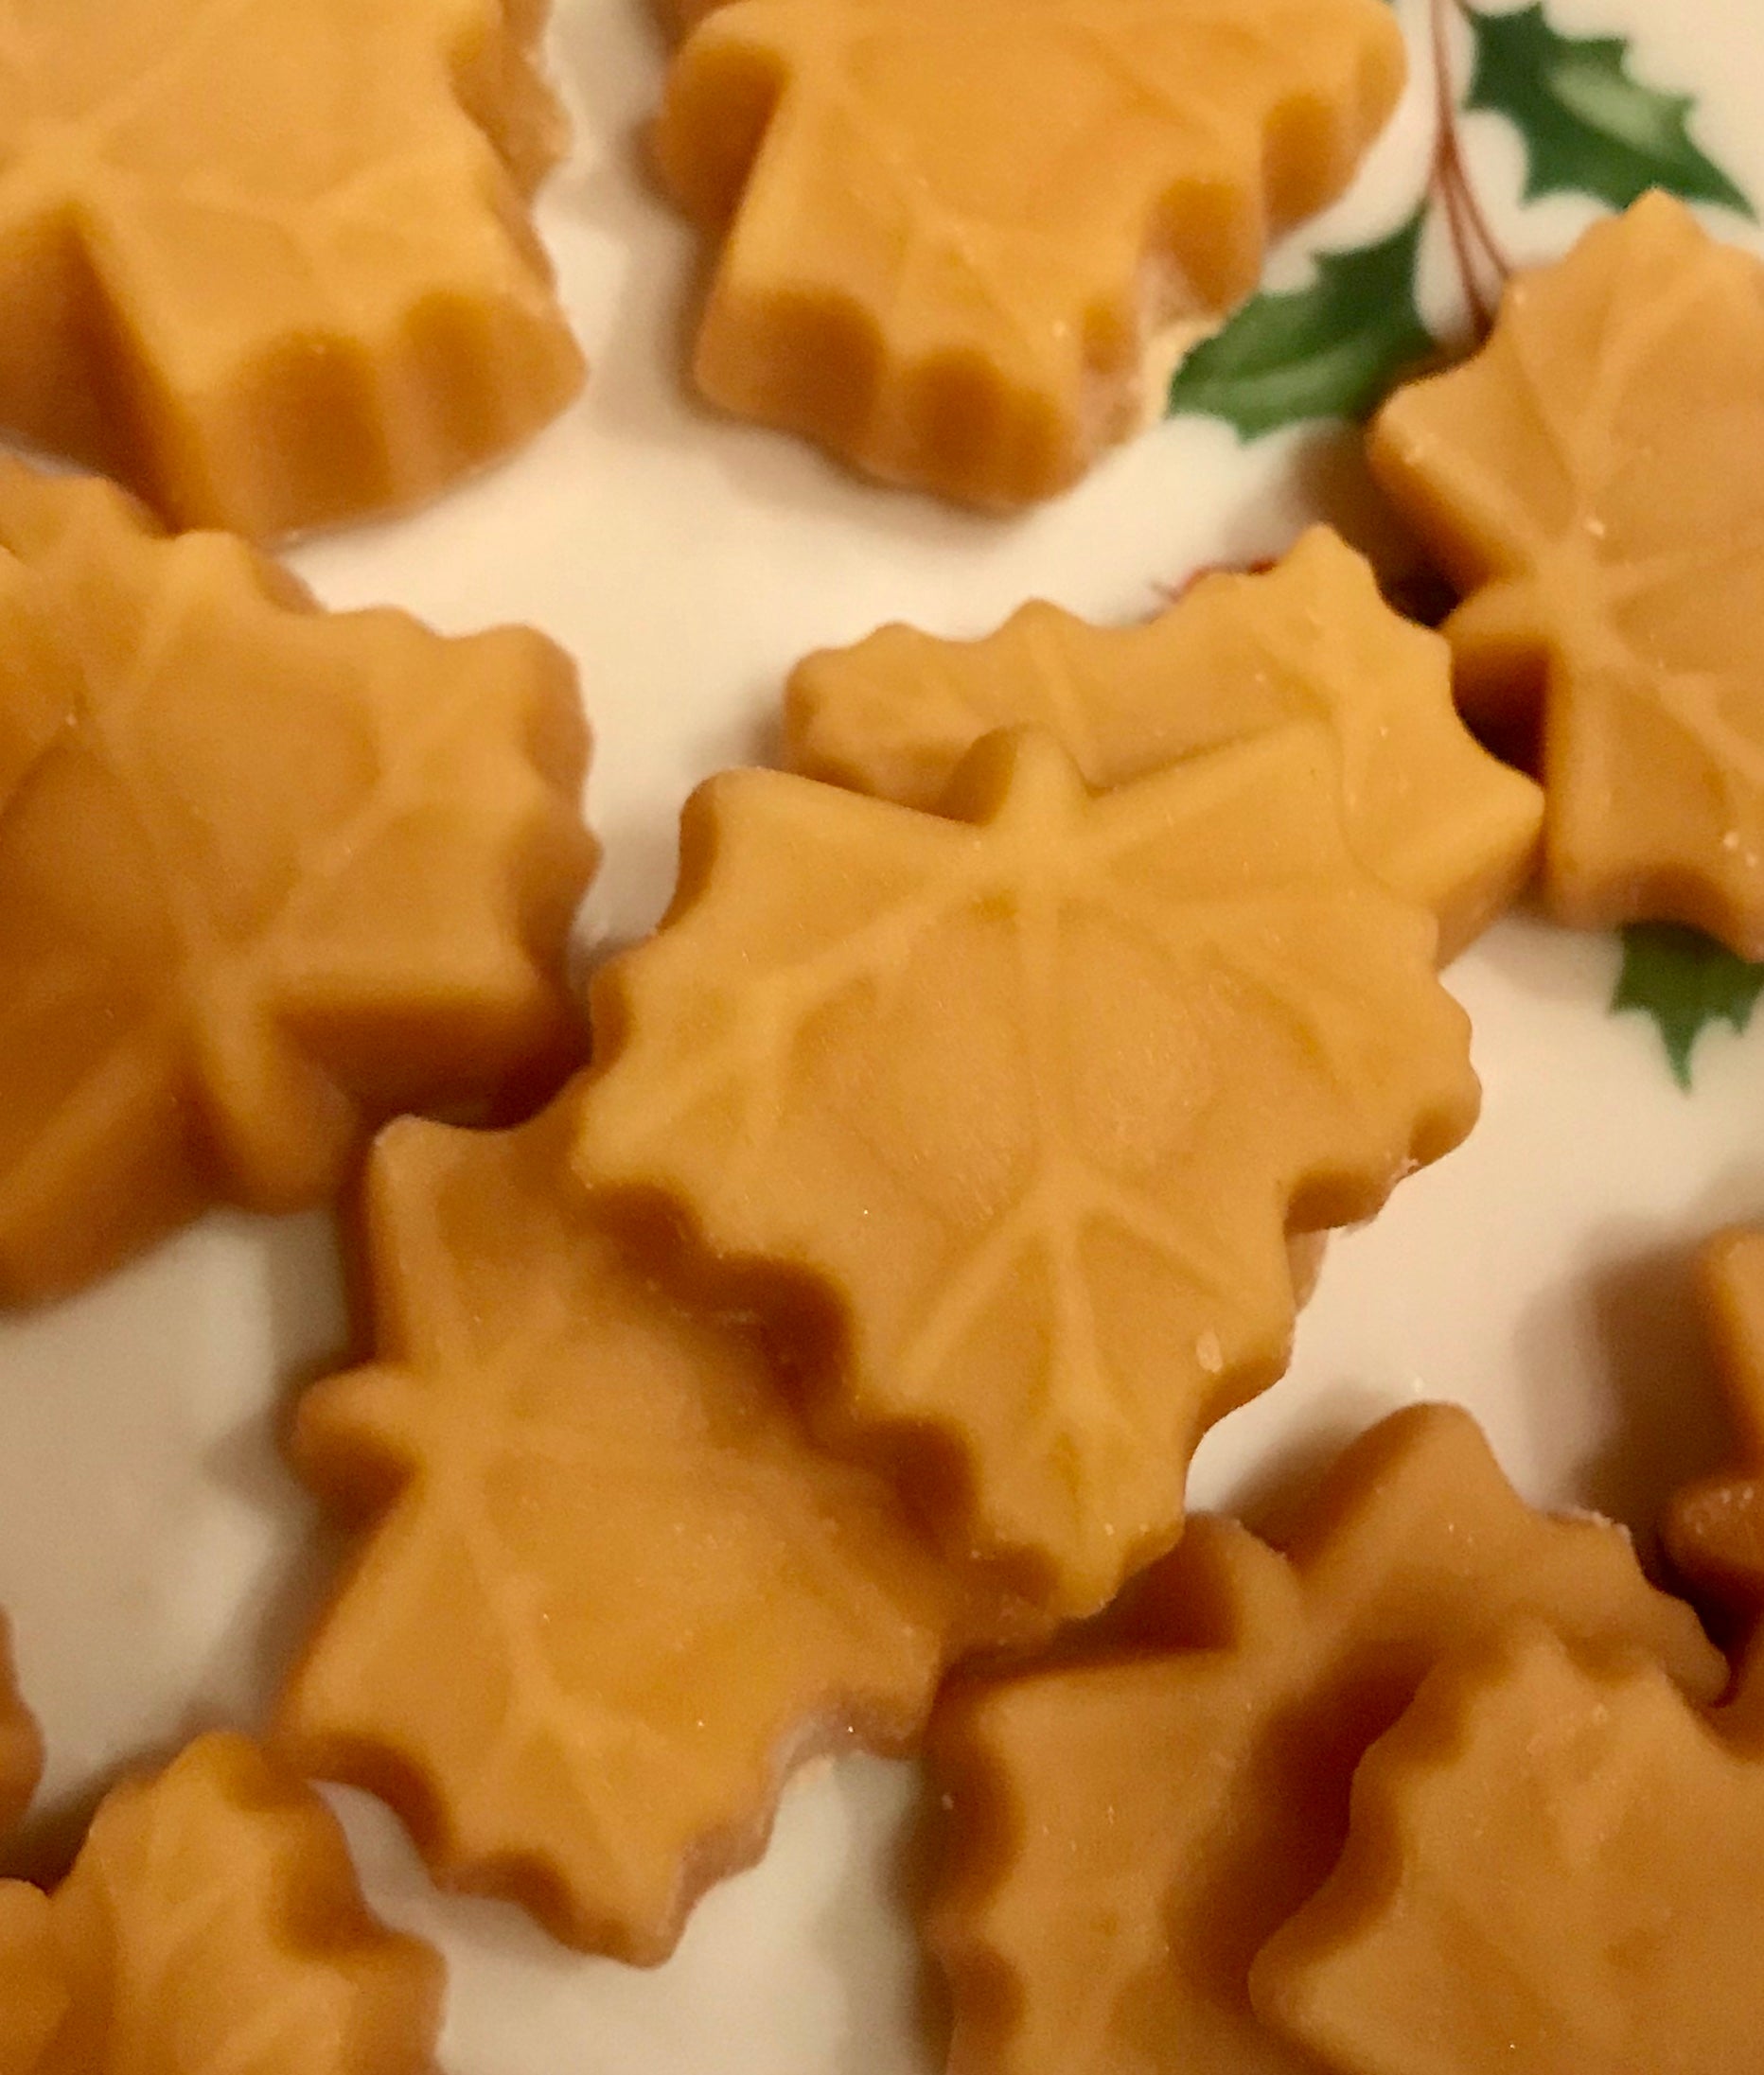 Maple Sugar Candy - Vermont Shape with One Small Leaf - 1.5 oz Pure Maple  Candy - Palmer Lane Maple LLC